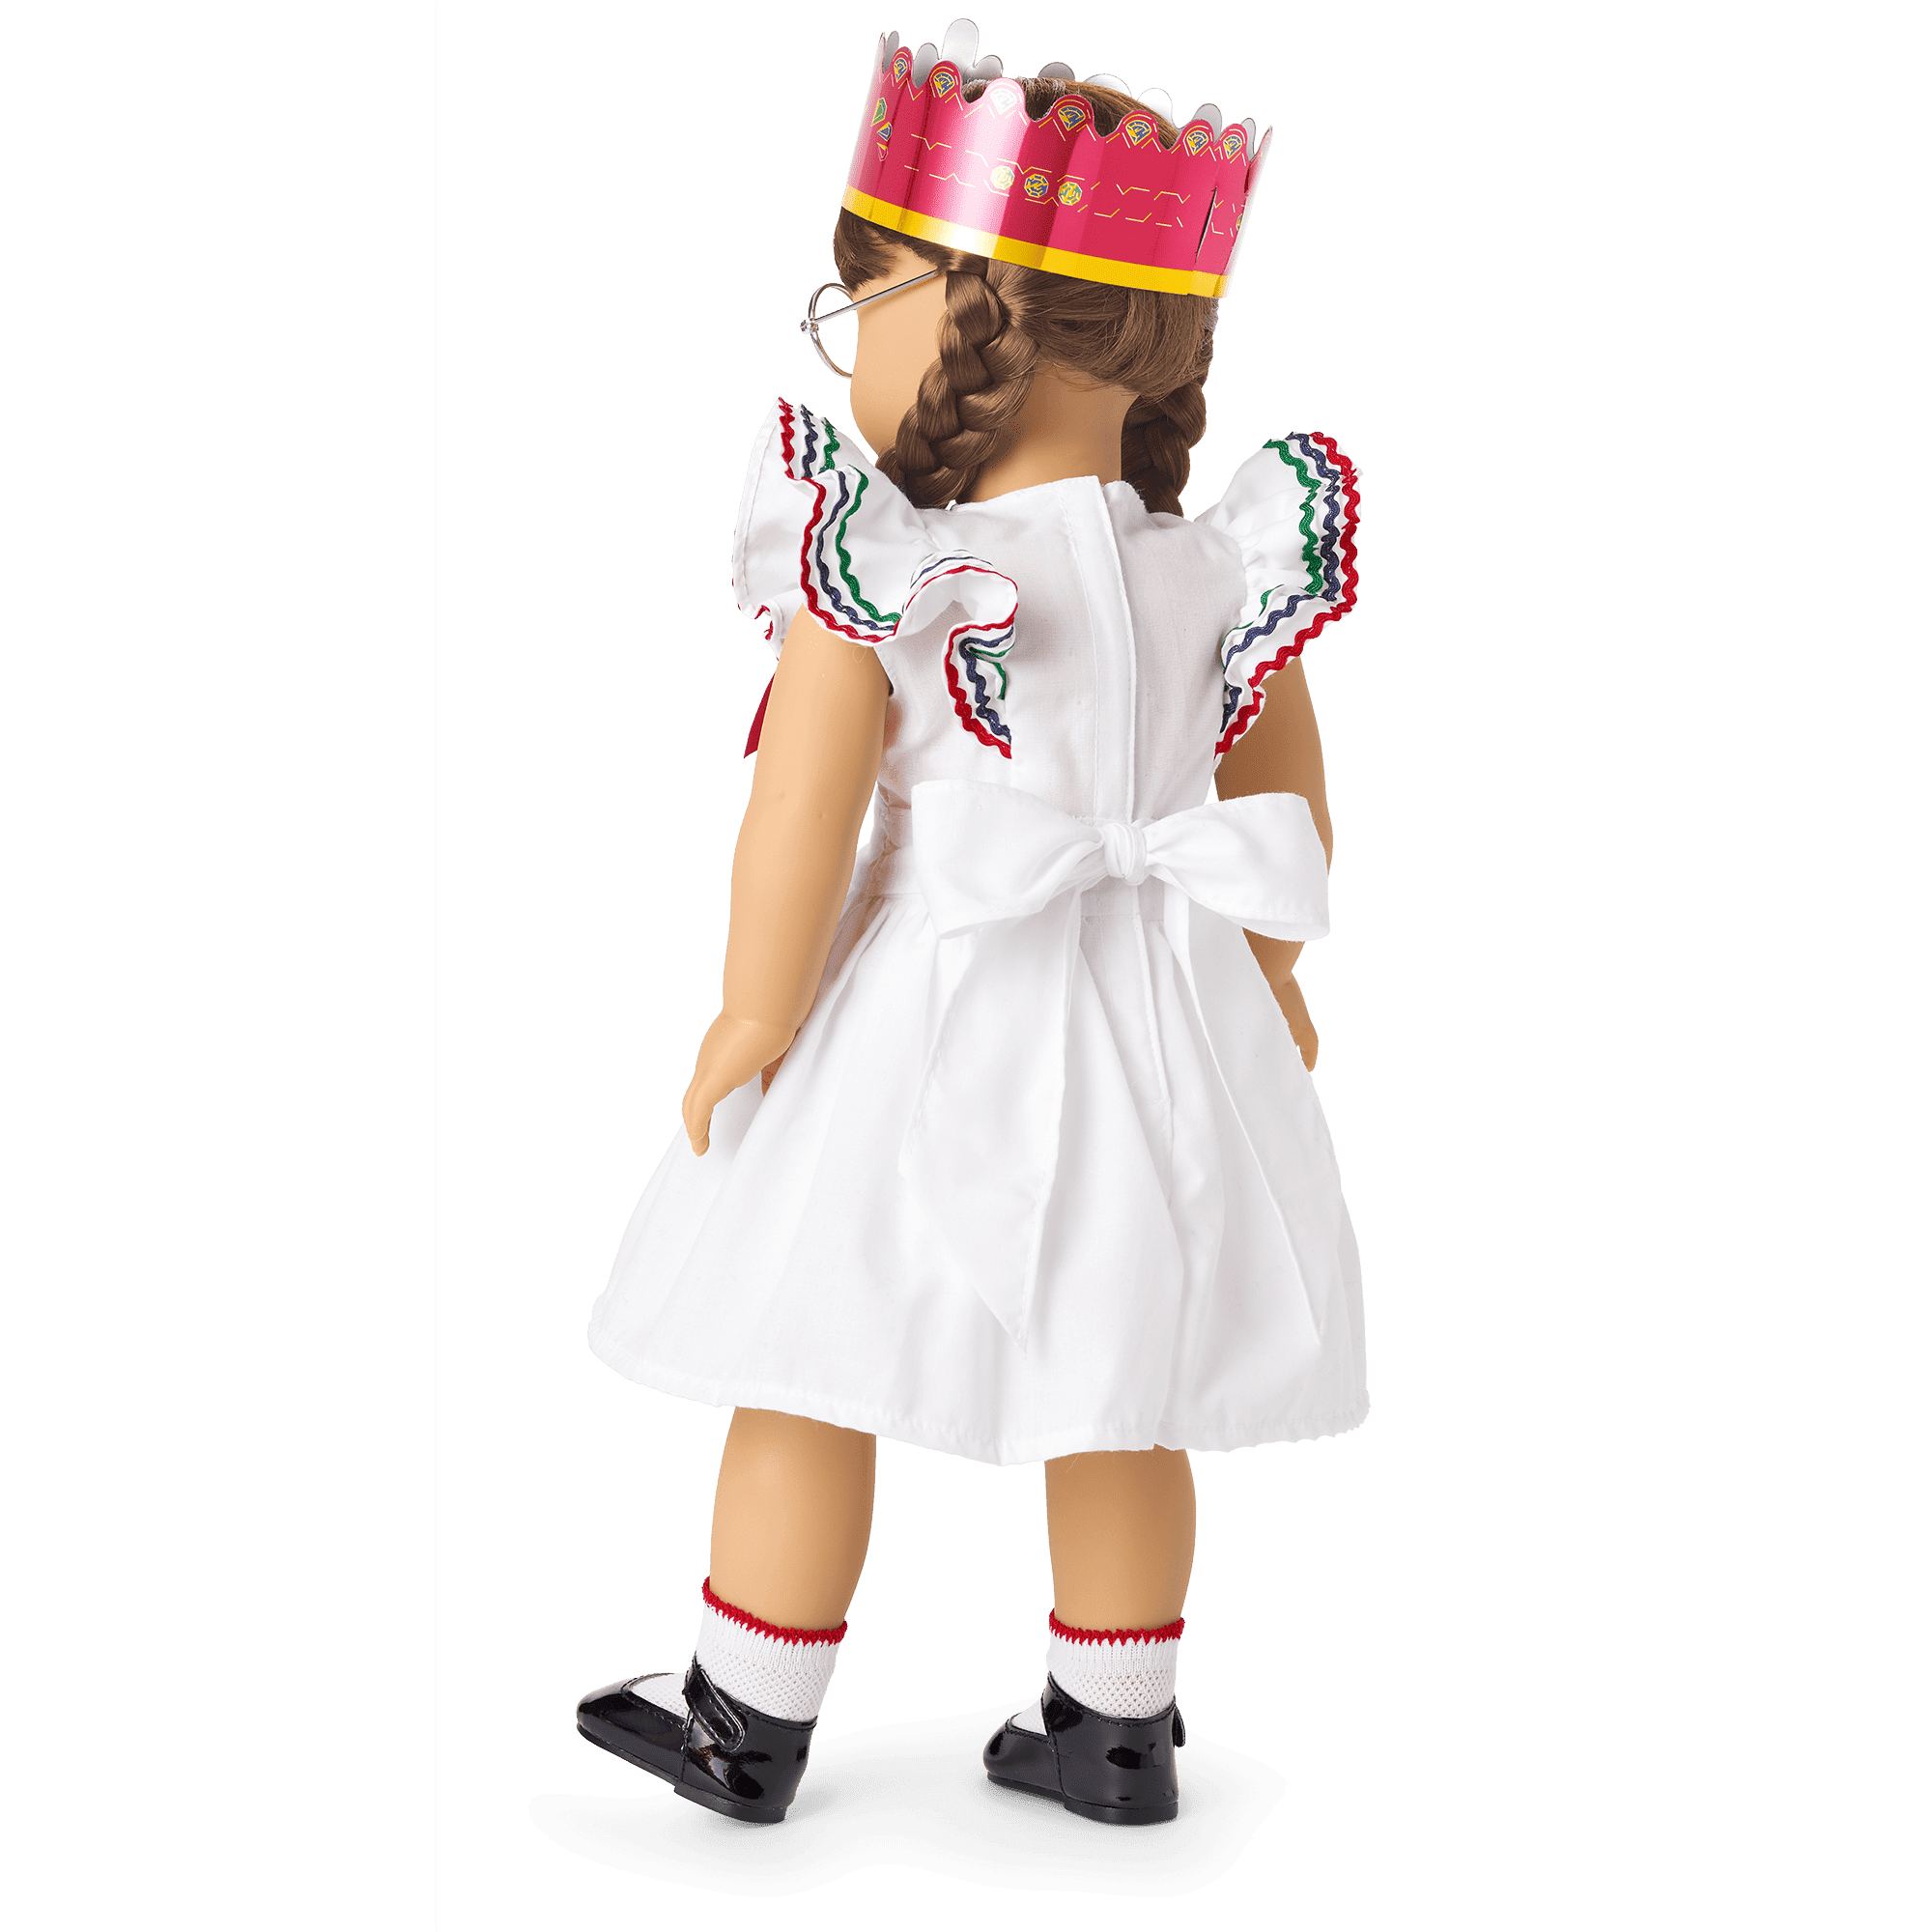 Molly’s™ Birthday Outfit for 18-inch Dolls